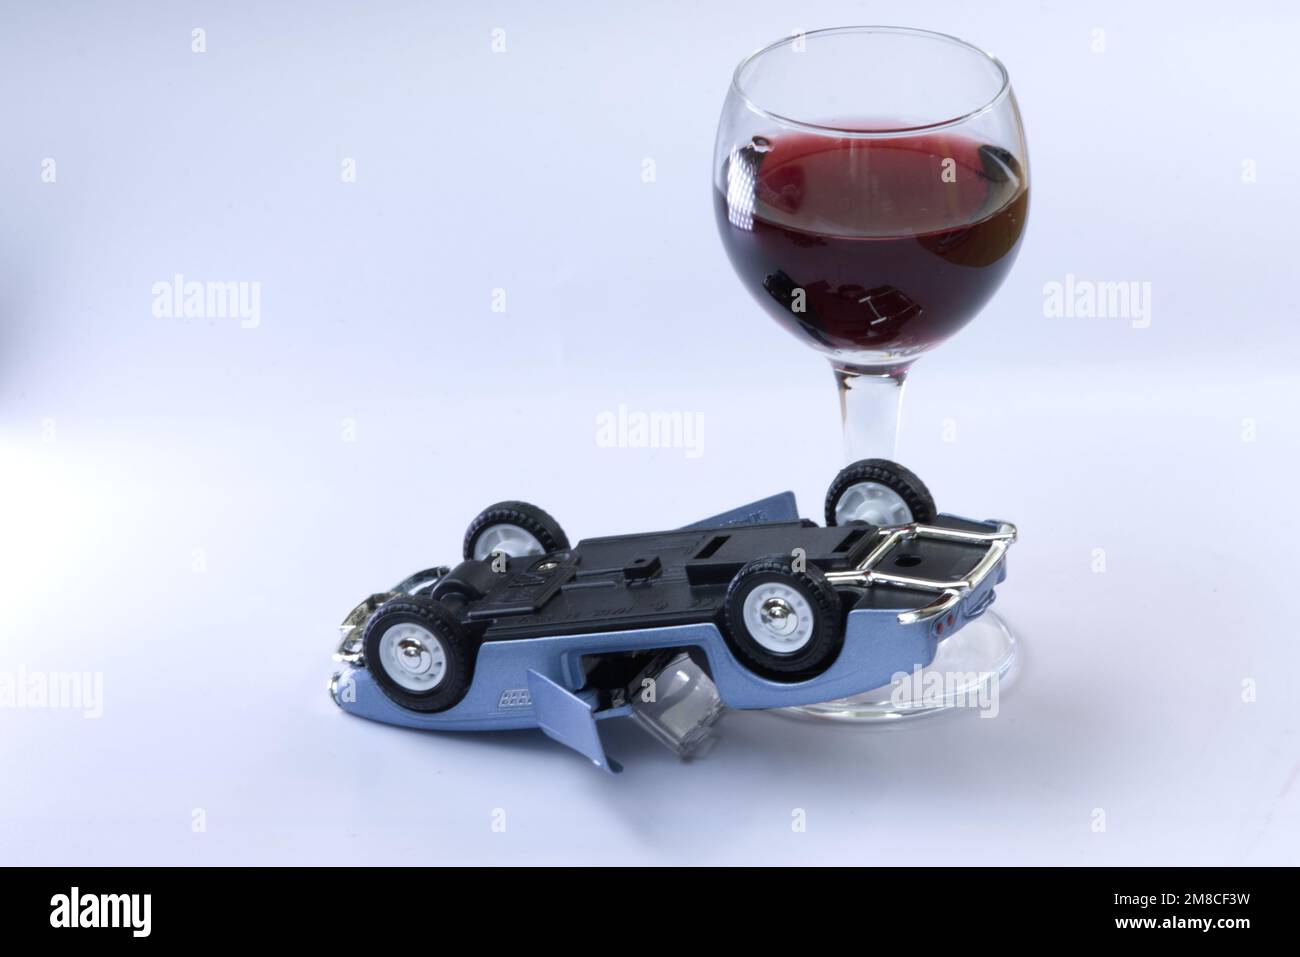 Overturned car on white background and glass with wine, don't drink and drive concept. Stock Photo